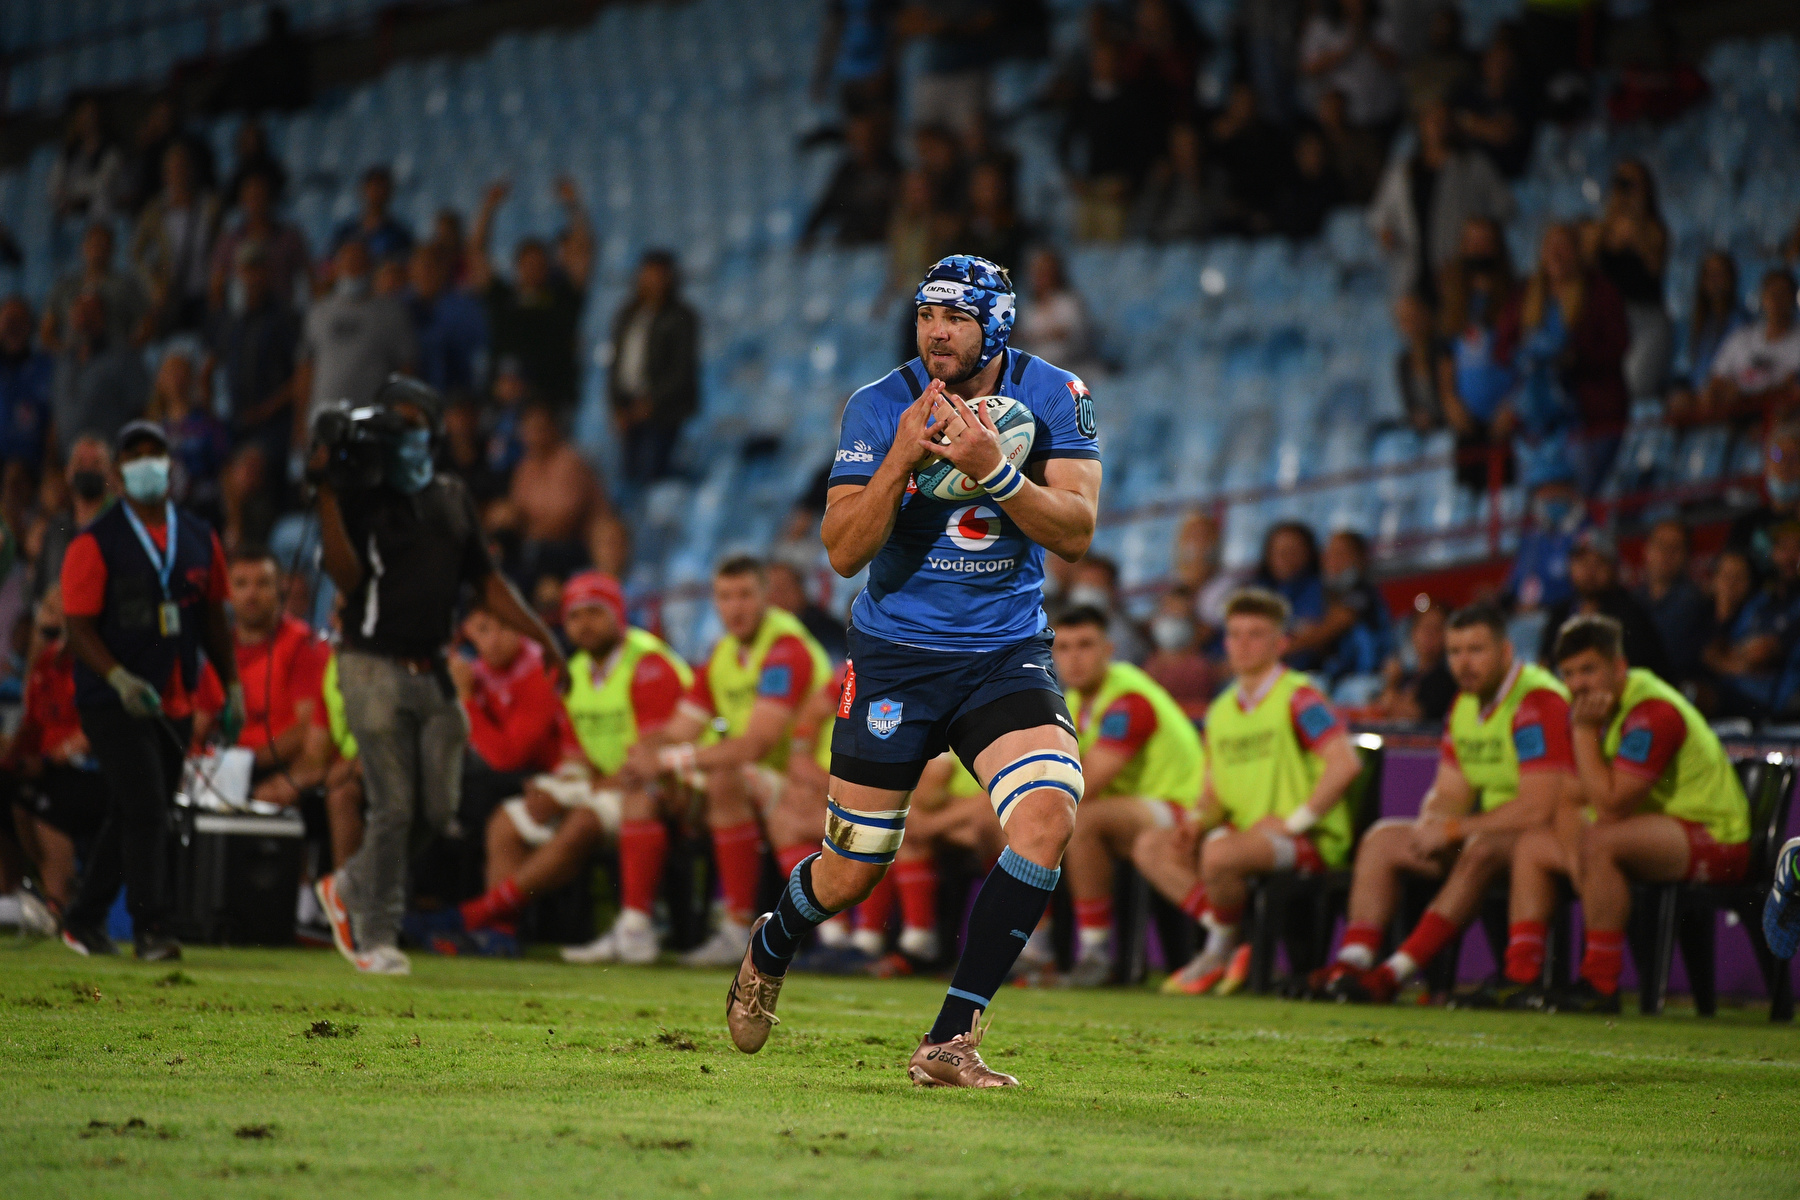 Brink relishing being back home and play in Vodacom URC